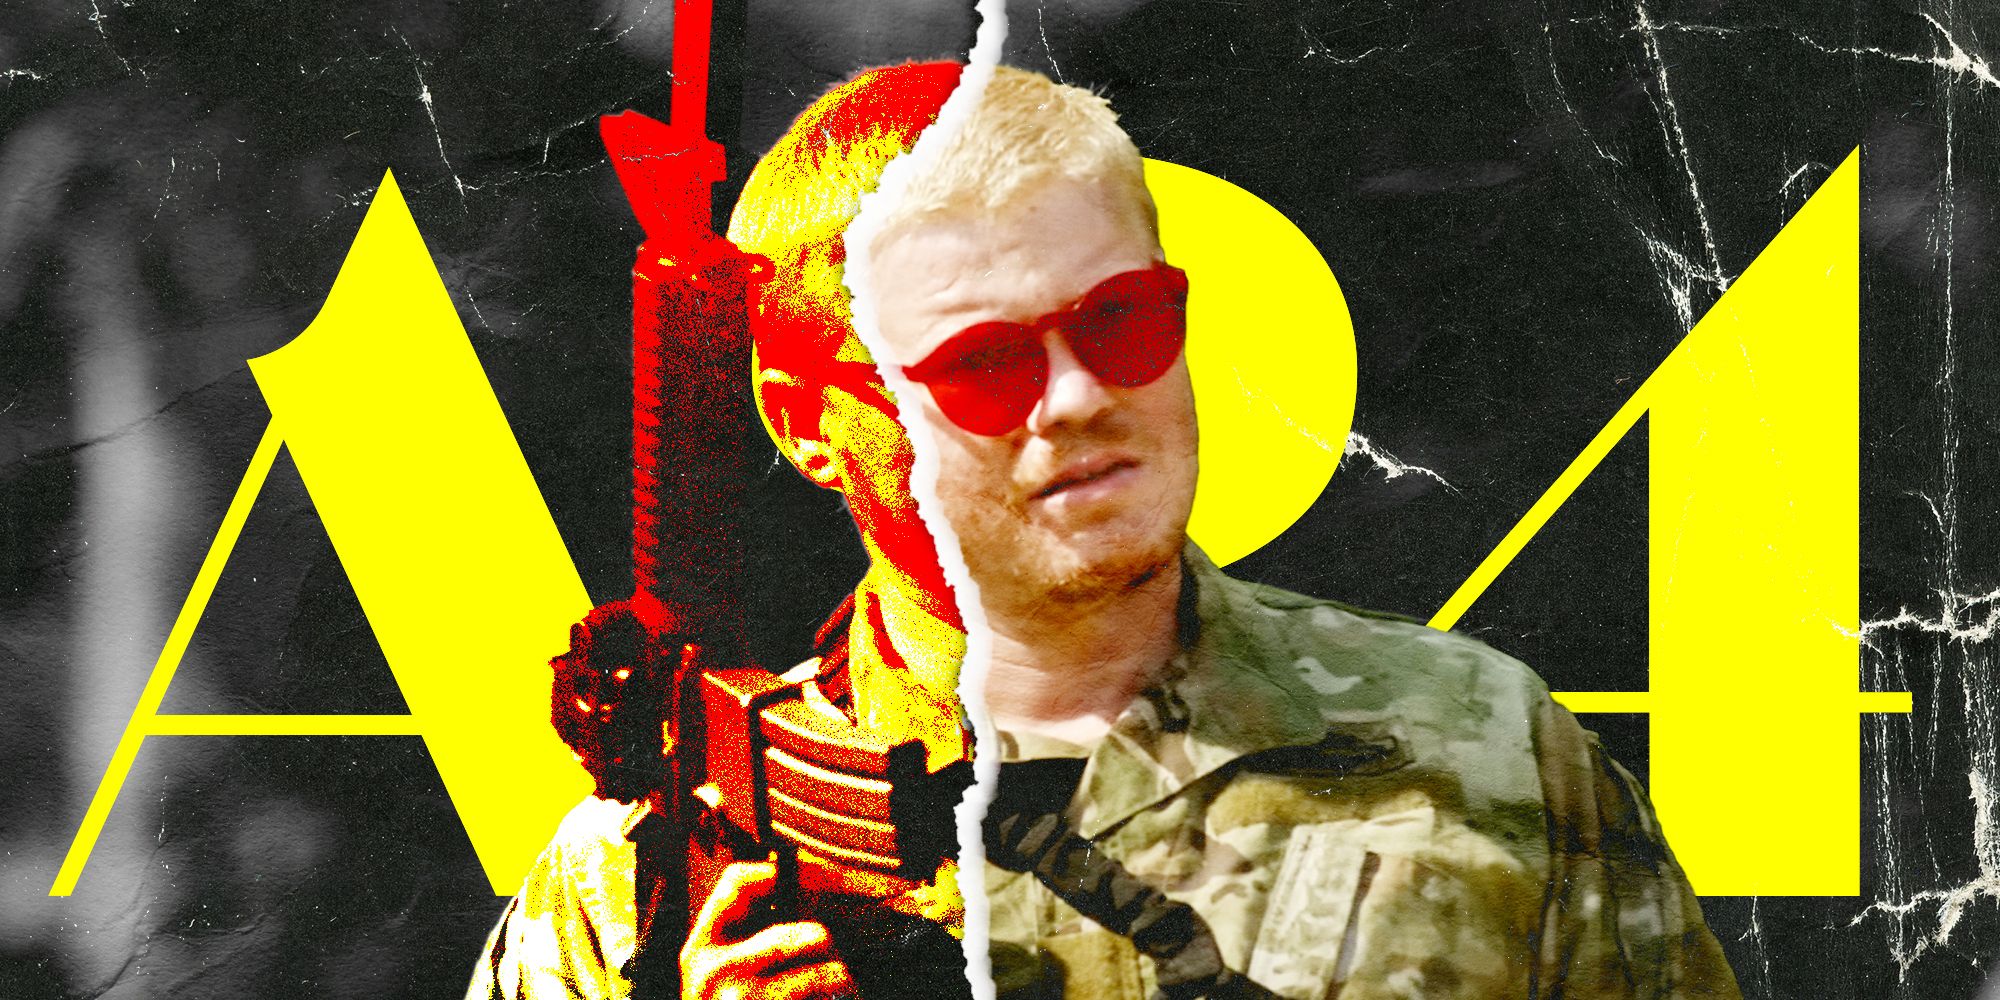 Jesse Plemons holding a machine gun in Civil War with the A24 logo behind him in yellow on a black background. There is a crack running down the image.